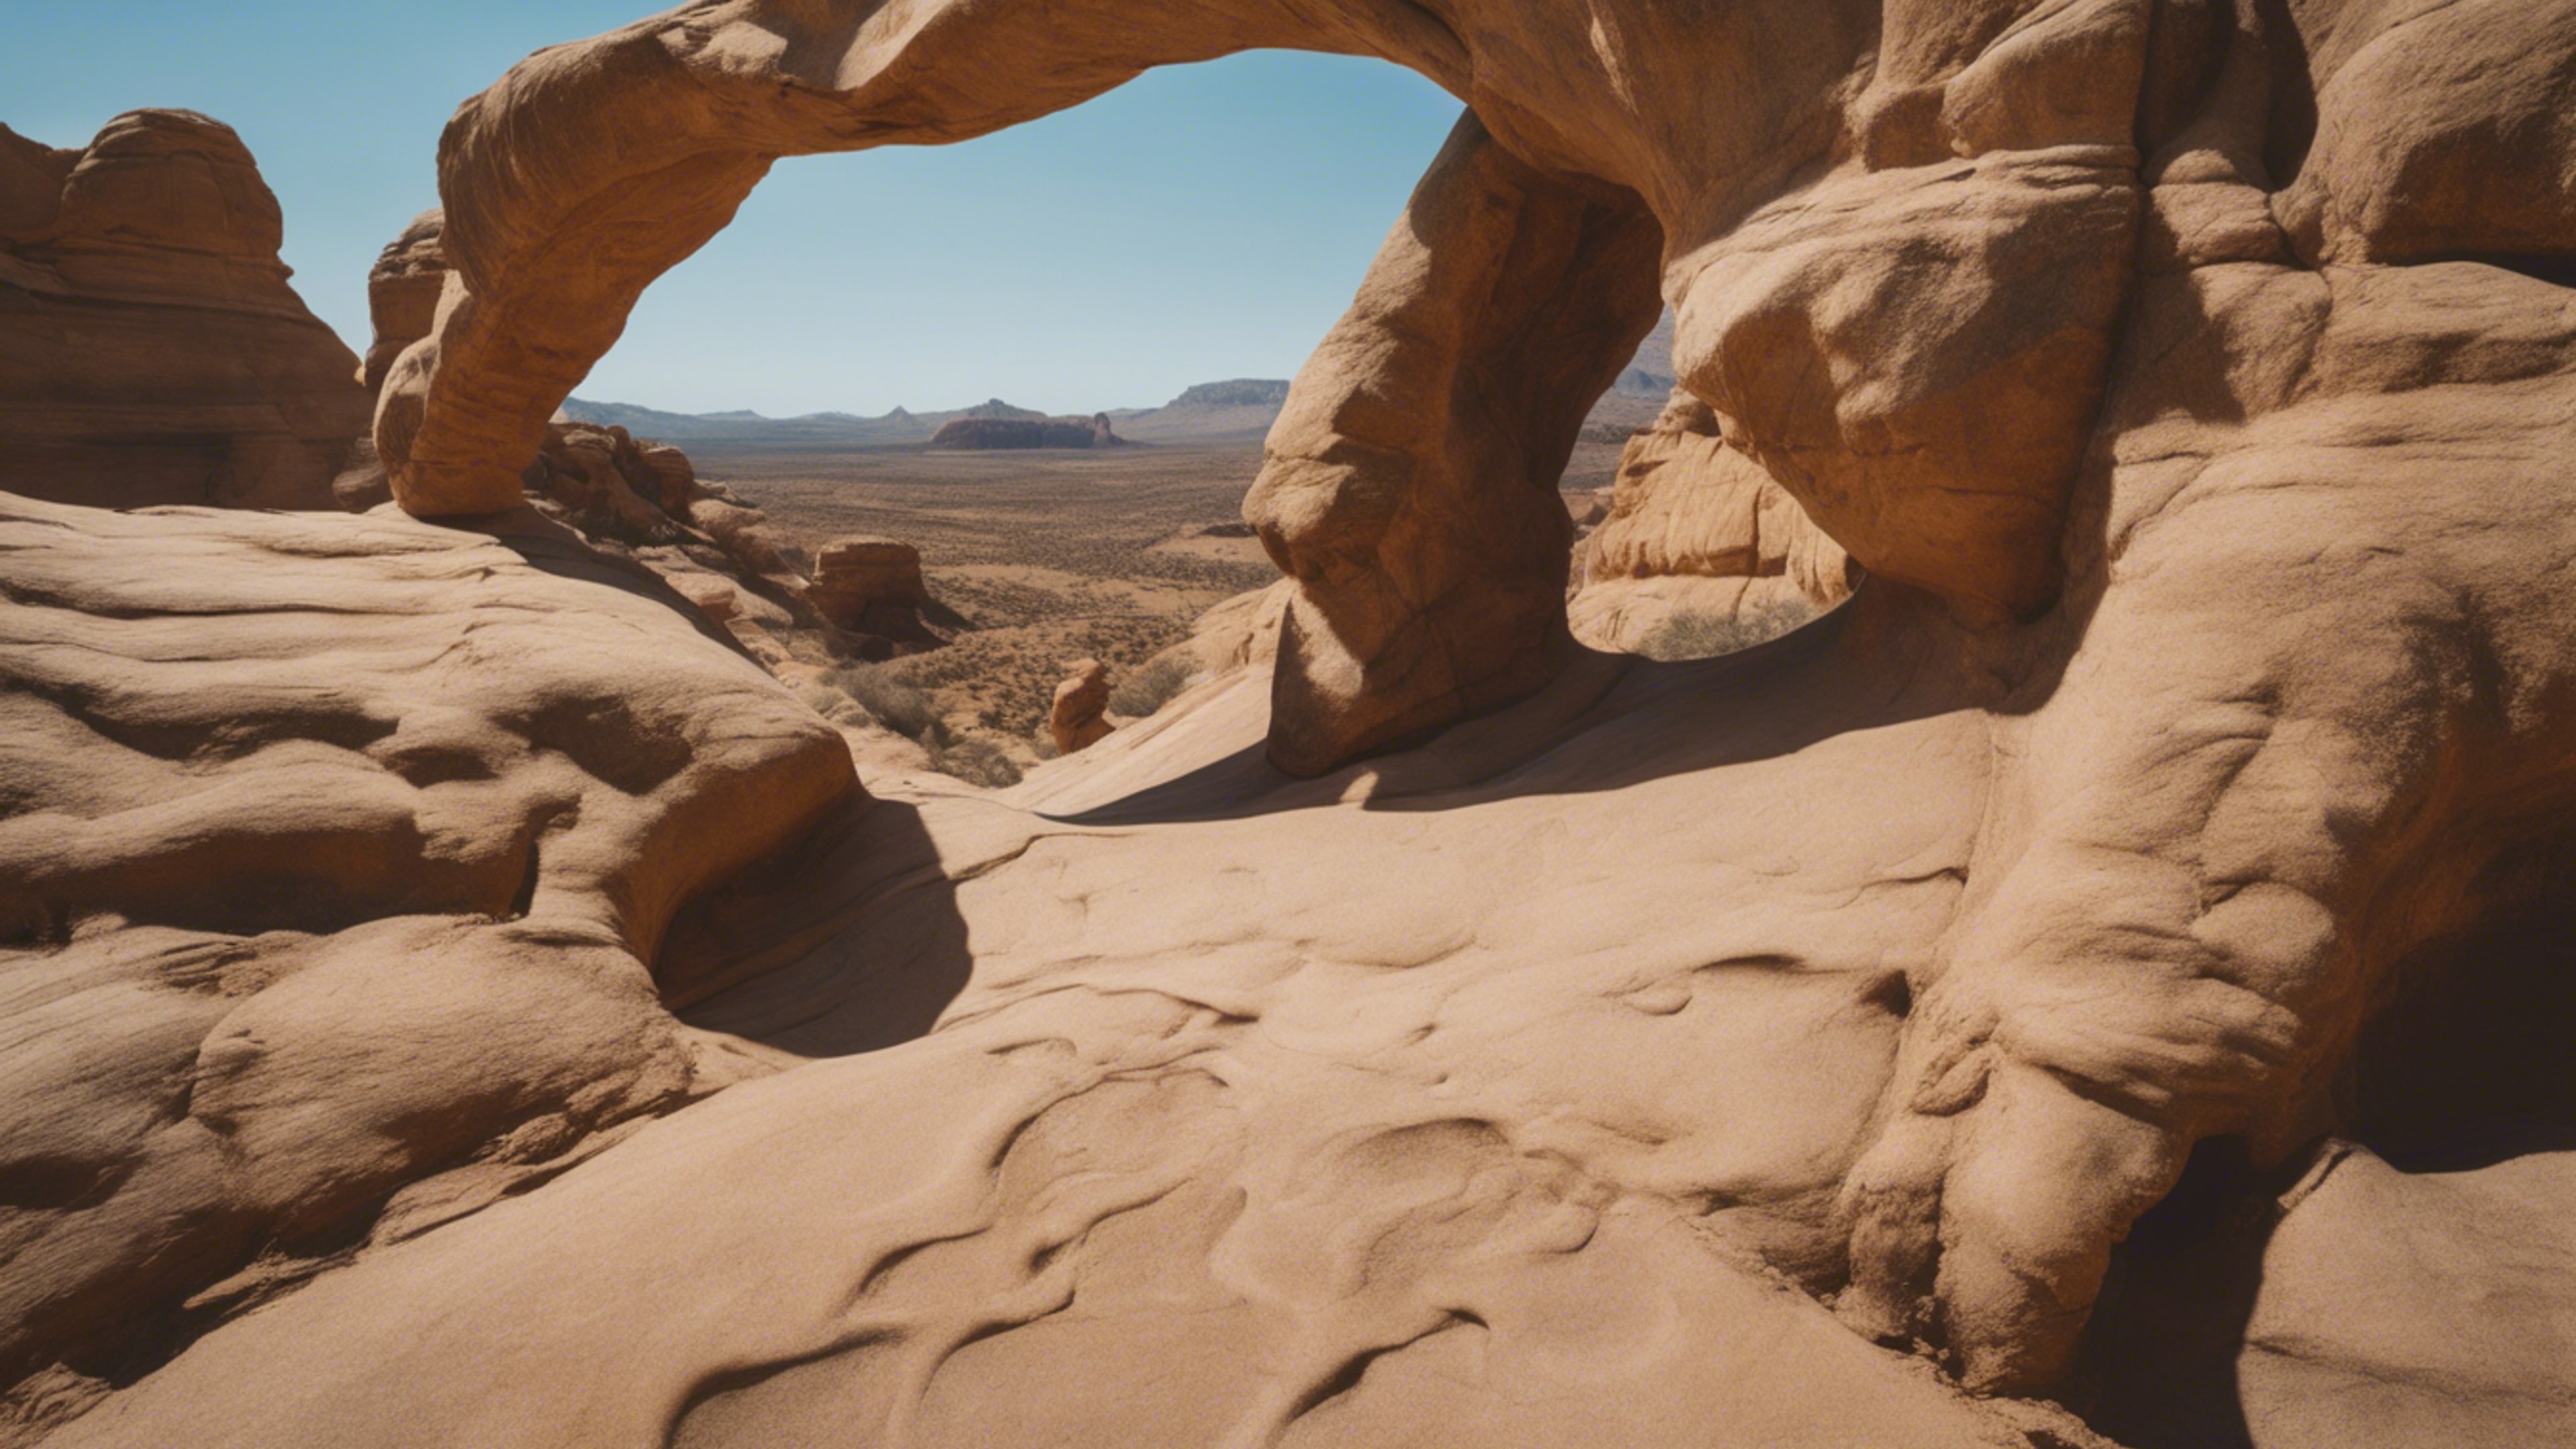 Sandstone formations and natural arches crafted by the wind in a desert environment.壁紙[3ed4cdc1994b4d4da2f3]